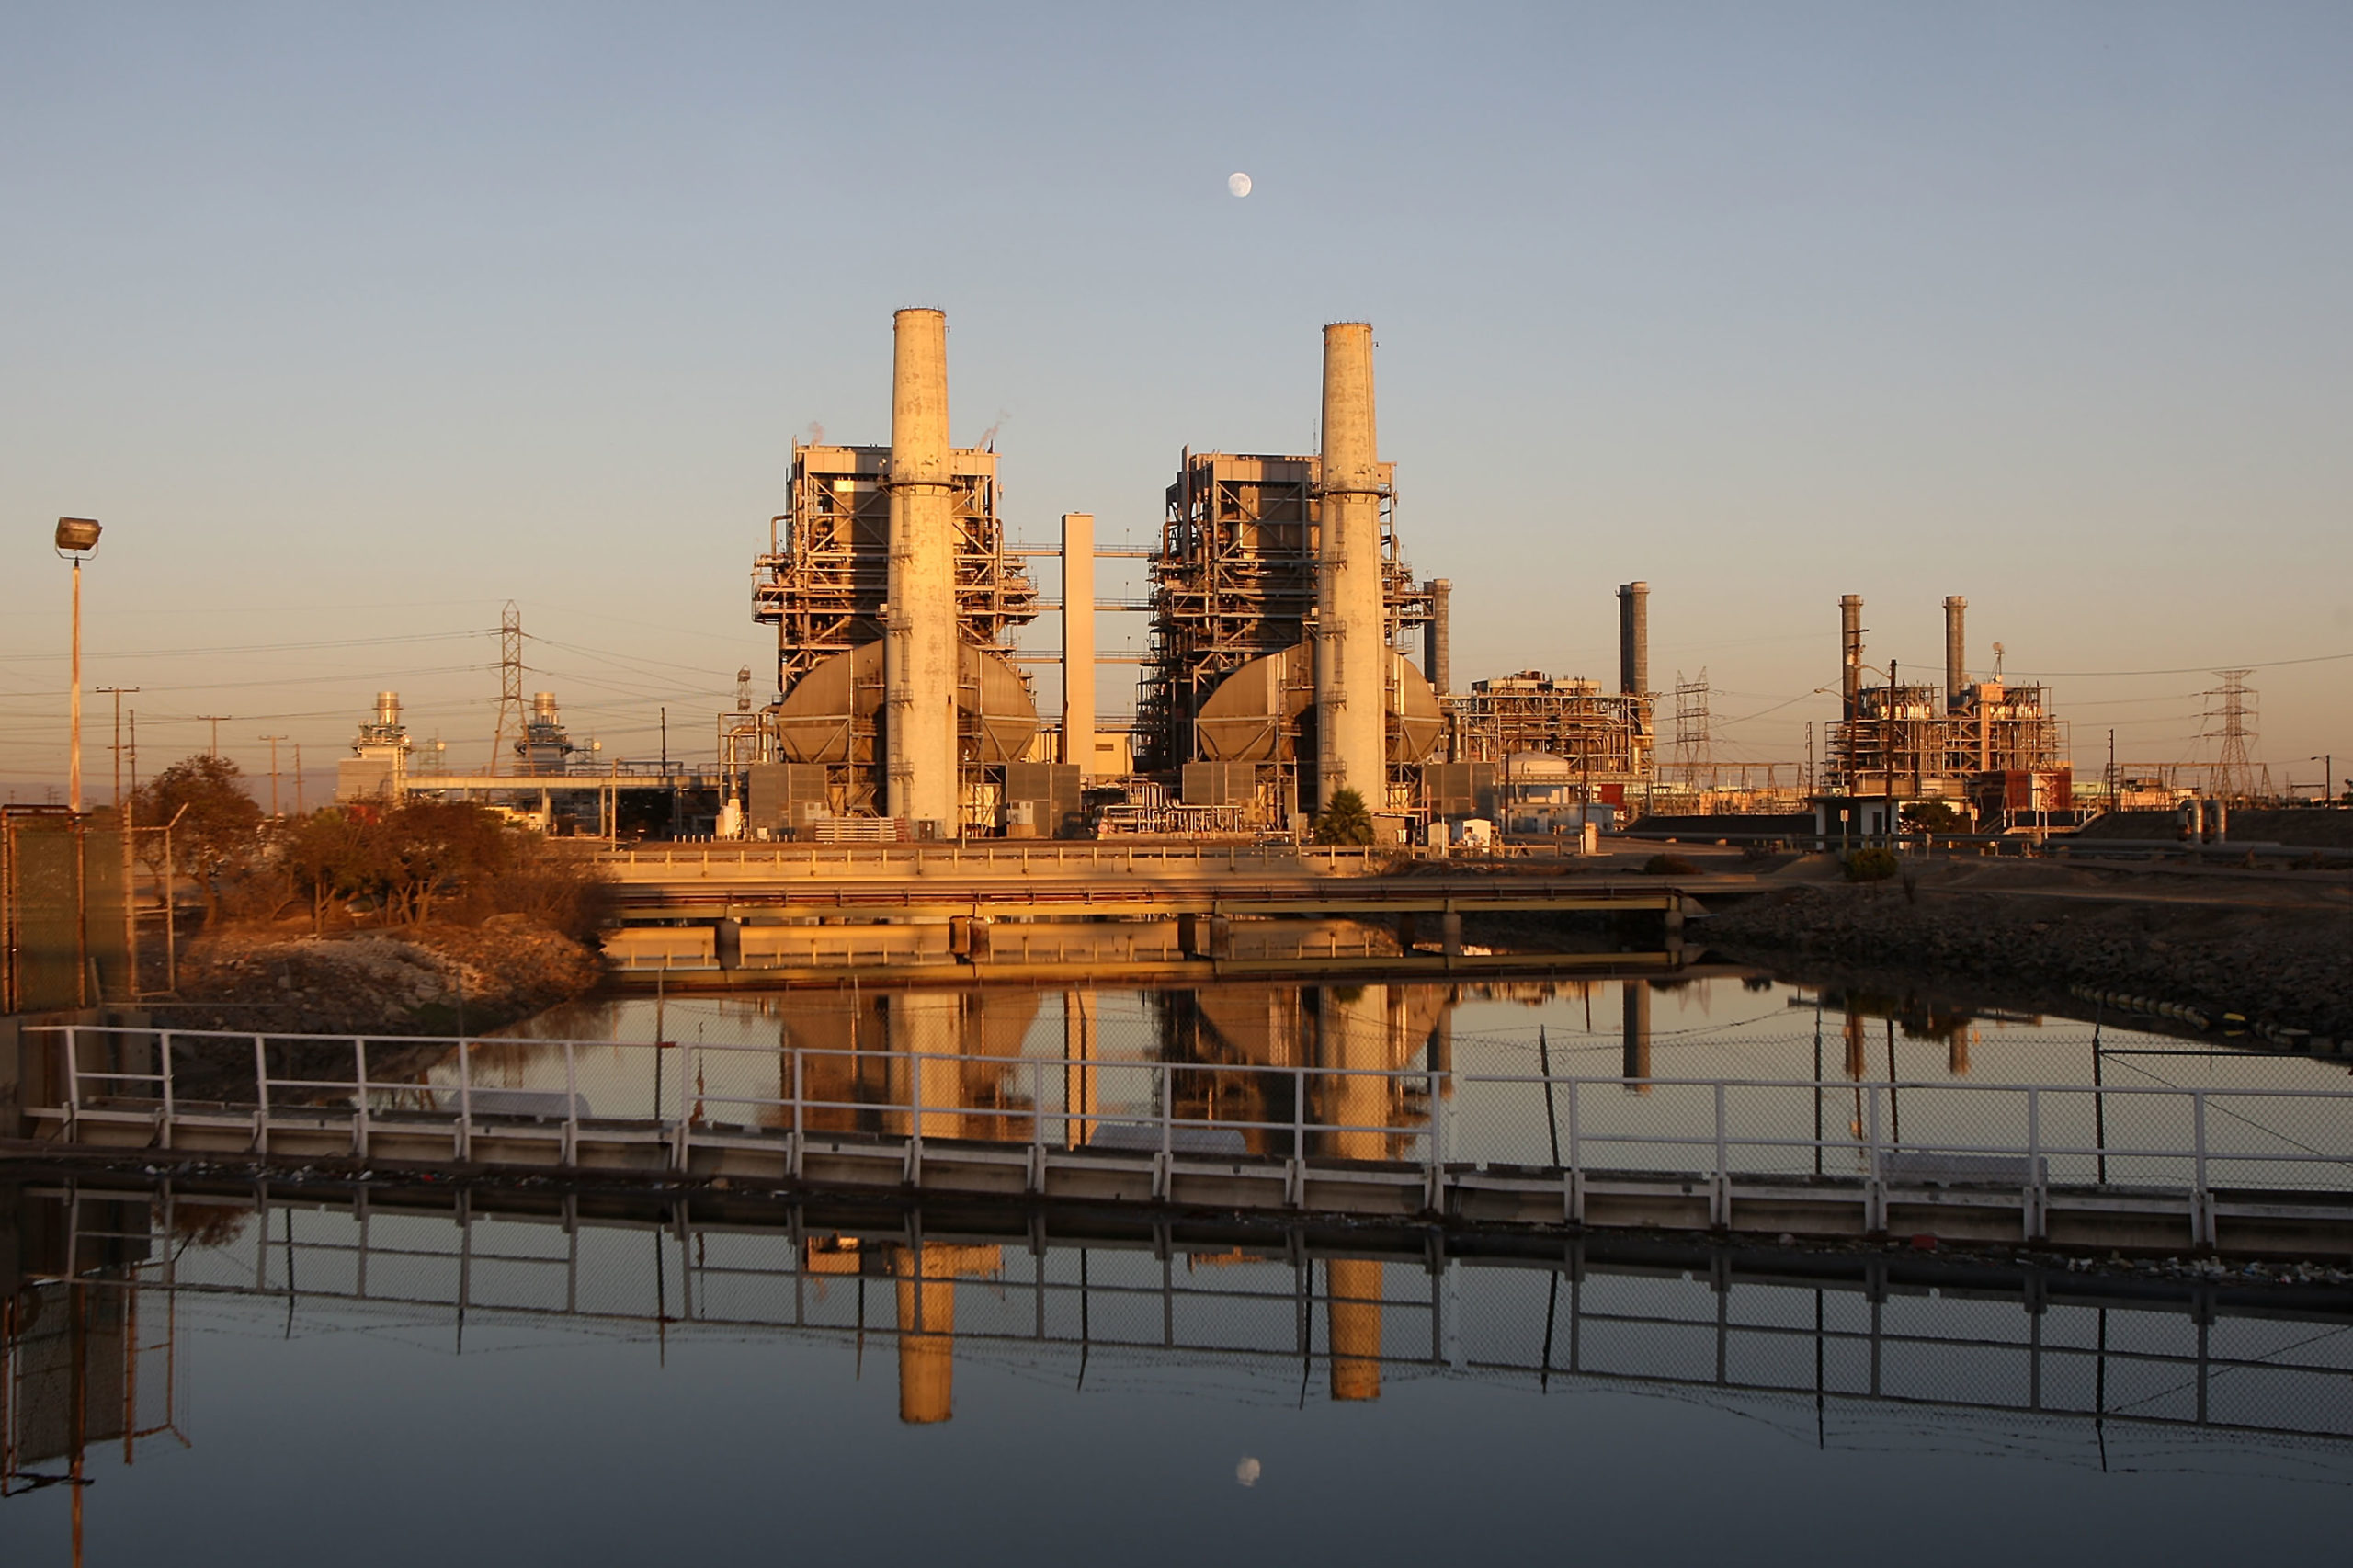 The AES Corporation 495-megawatt Alamitos natural gas-fired power station stands in Long Beach, California. (David McNew/Getty Images)